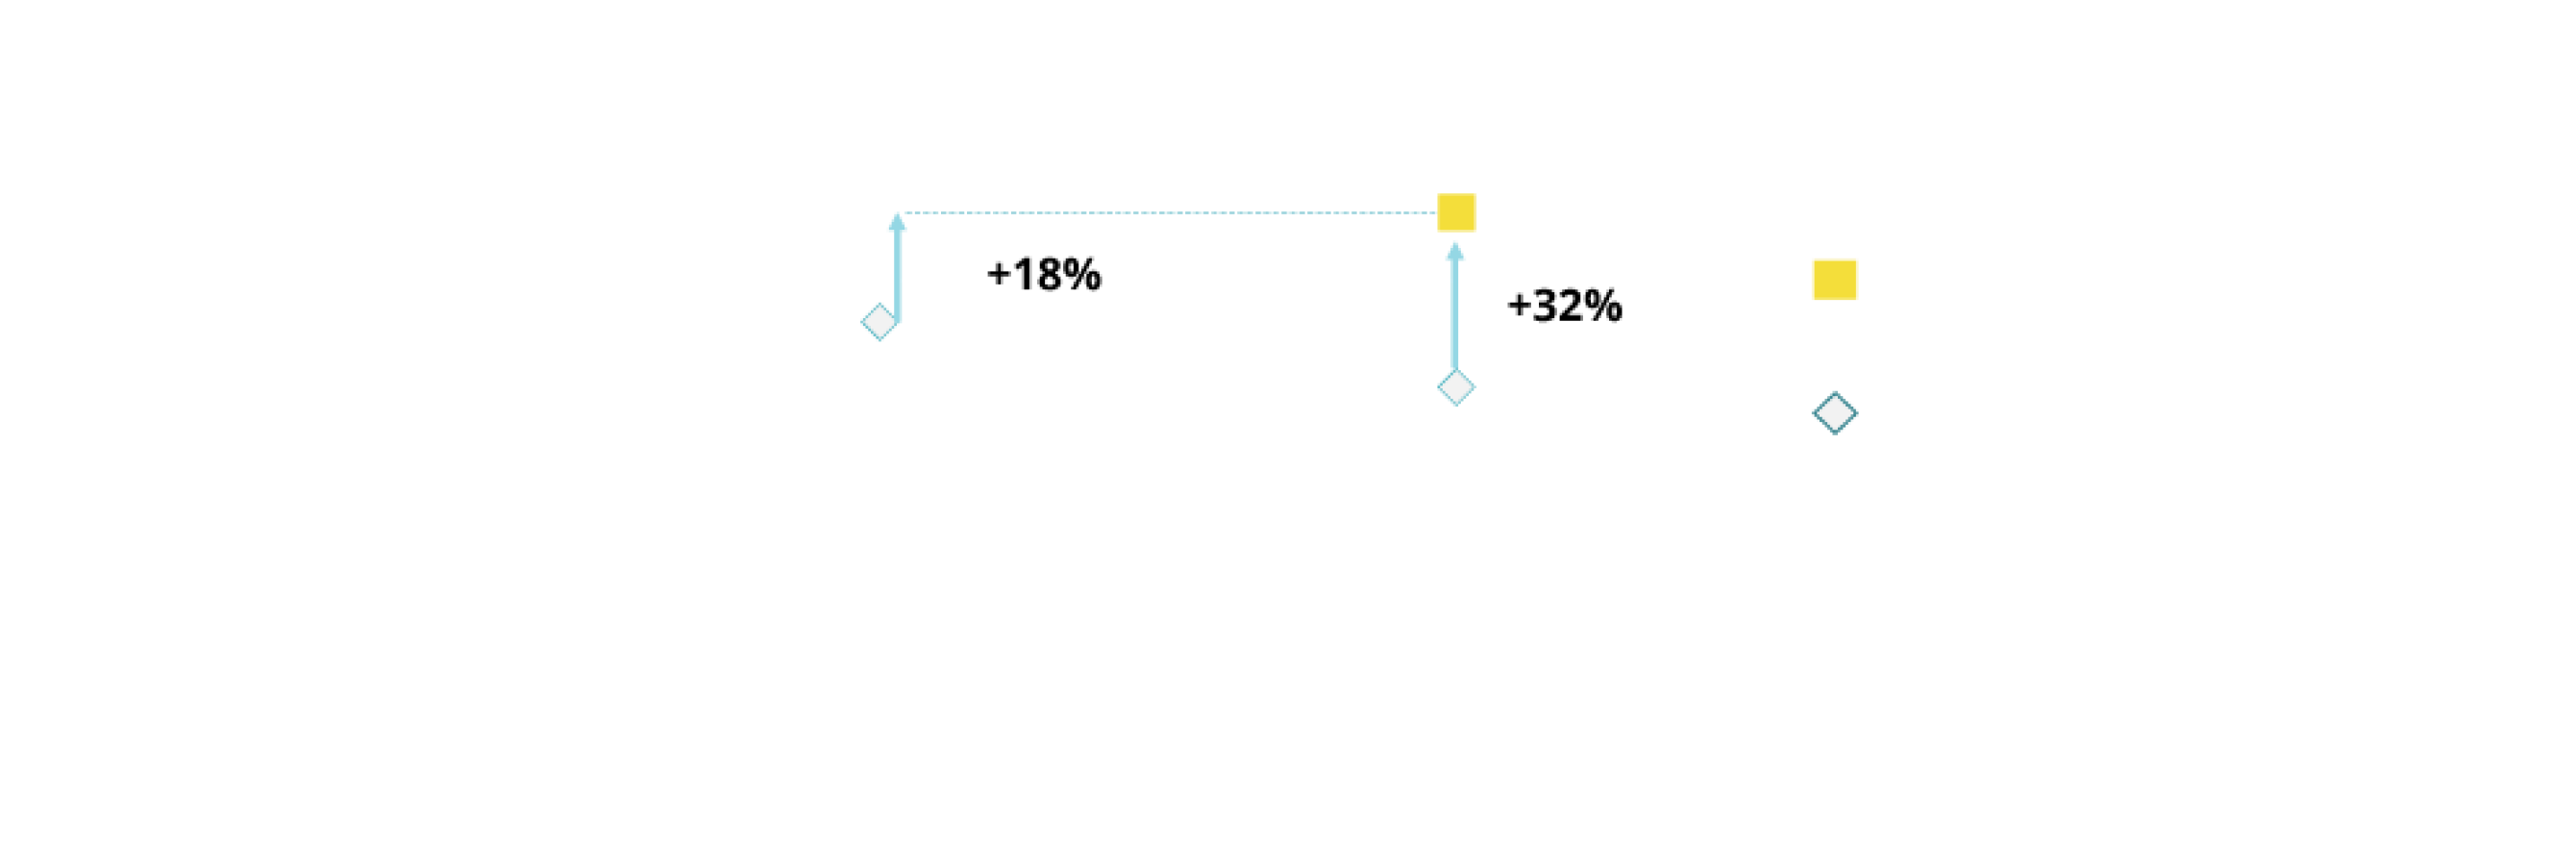 A dot graph comparing the vitreous flow rate of various ULTRAVIT Probes. The 10K 25+ Gauge Advanced ULTRAVIT Probe had a 32% higher flow rate than the 7.5K 25+ Gauge ULTRAVIT Probe, and a 18% higher flow rate than the 7.5K 23 Gauge ULTRAVIT Probe.